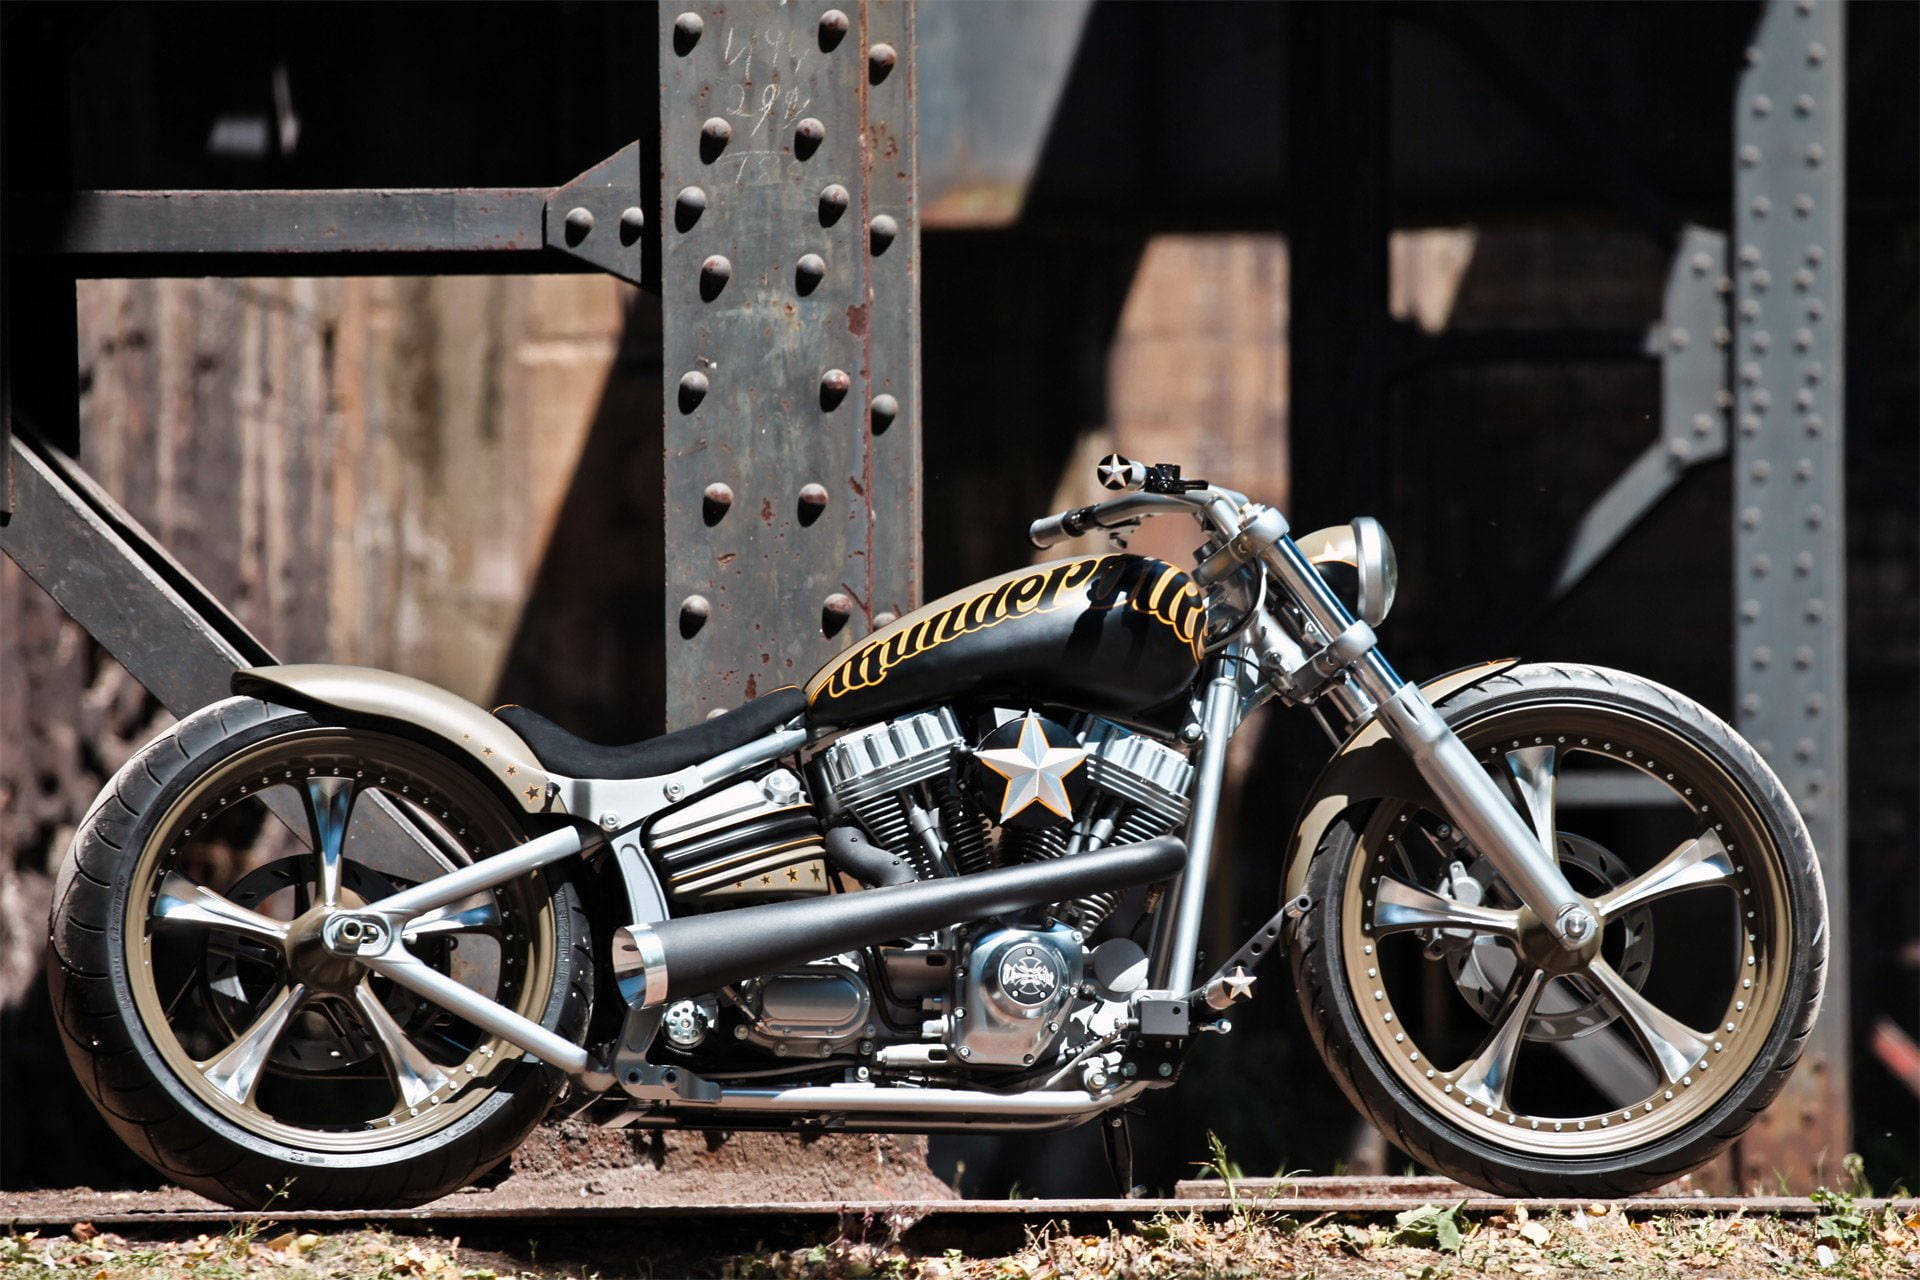 100+] Bobber Pictures